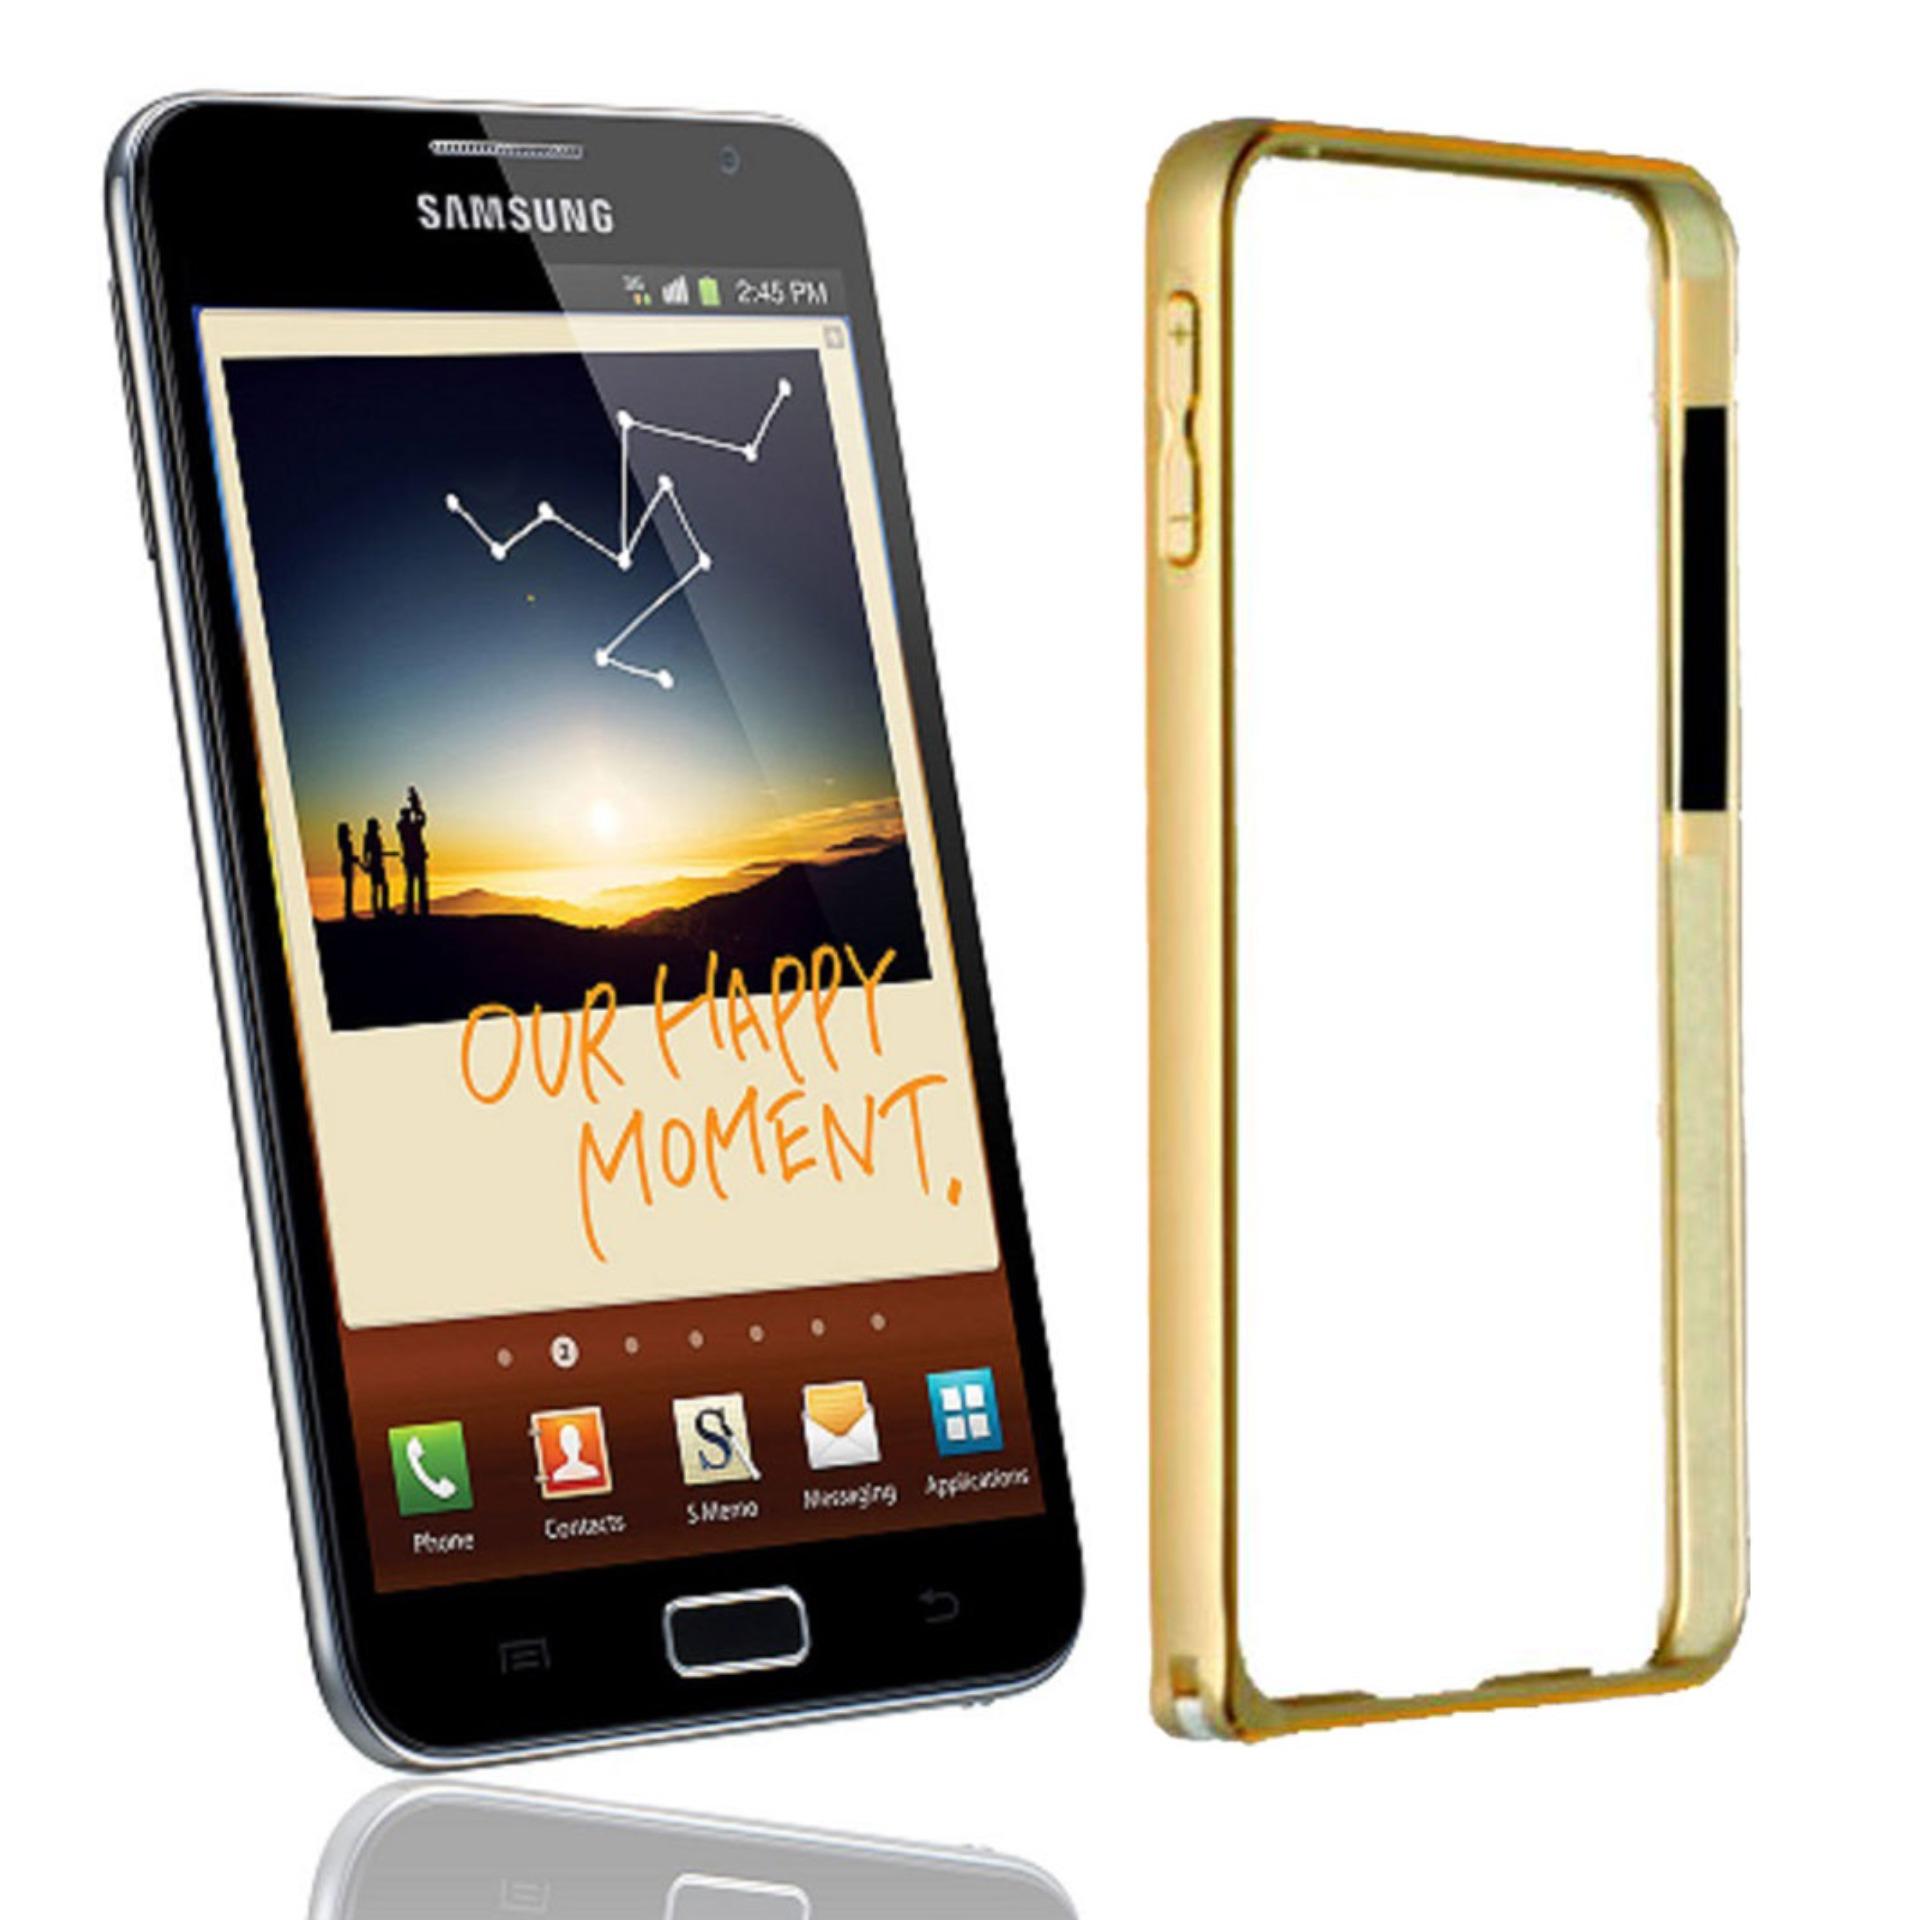 Aluminium Bumper Stainless Metal Bezel List for Samsung Galaxy Note 1 / I9220 / N7000 / 4G LTE Duos - Gold